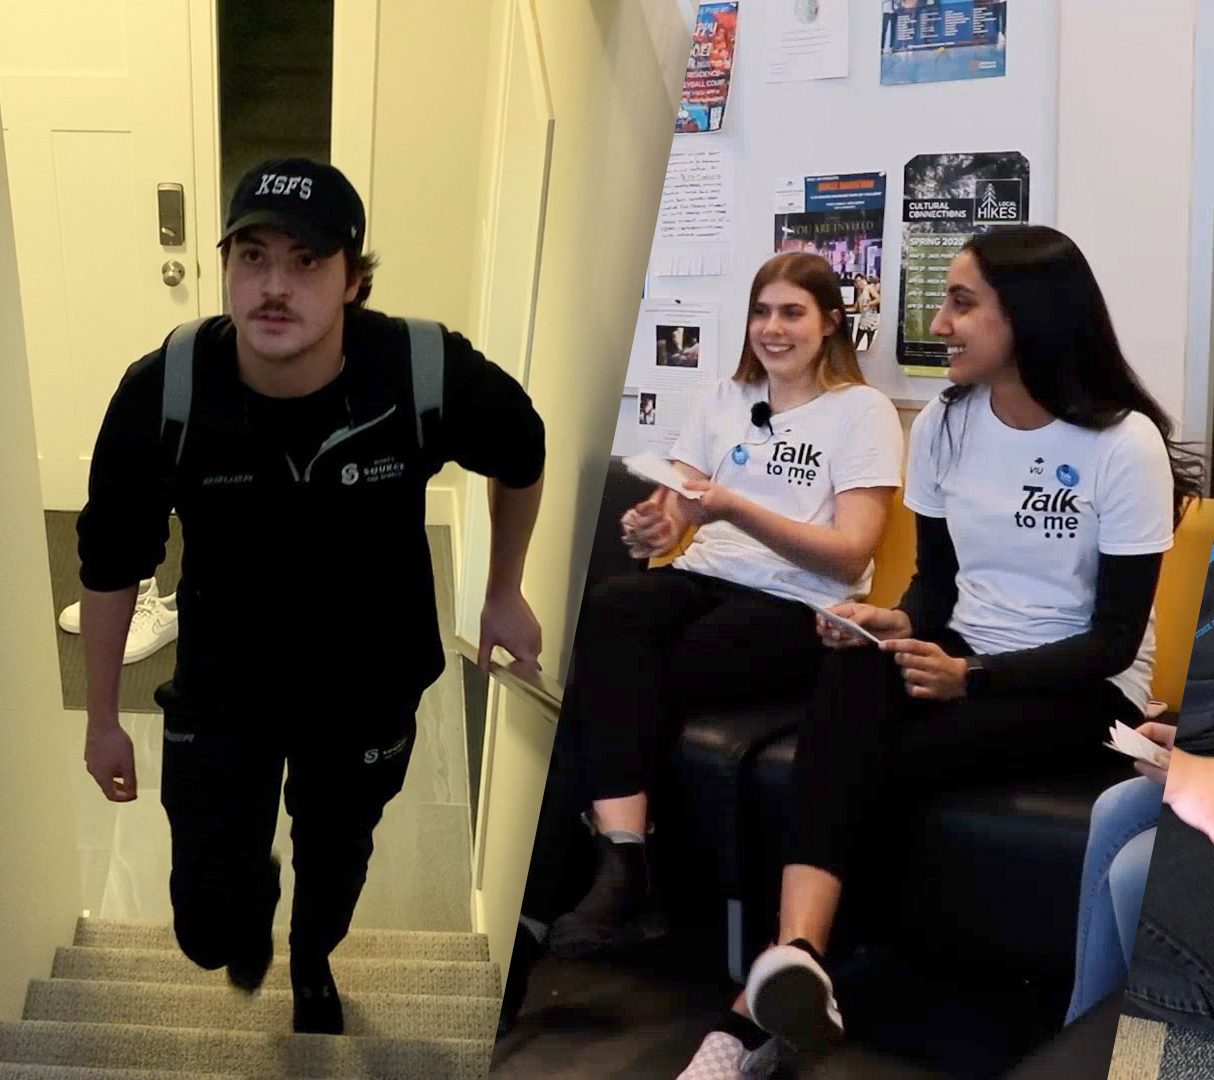 A splitscreen image of a man walking up a staircase on the left, and who women in white VIU "Talk to Me" shirts